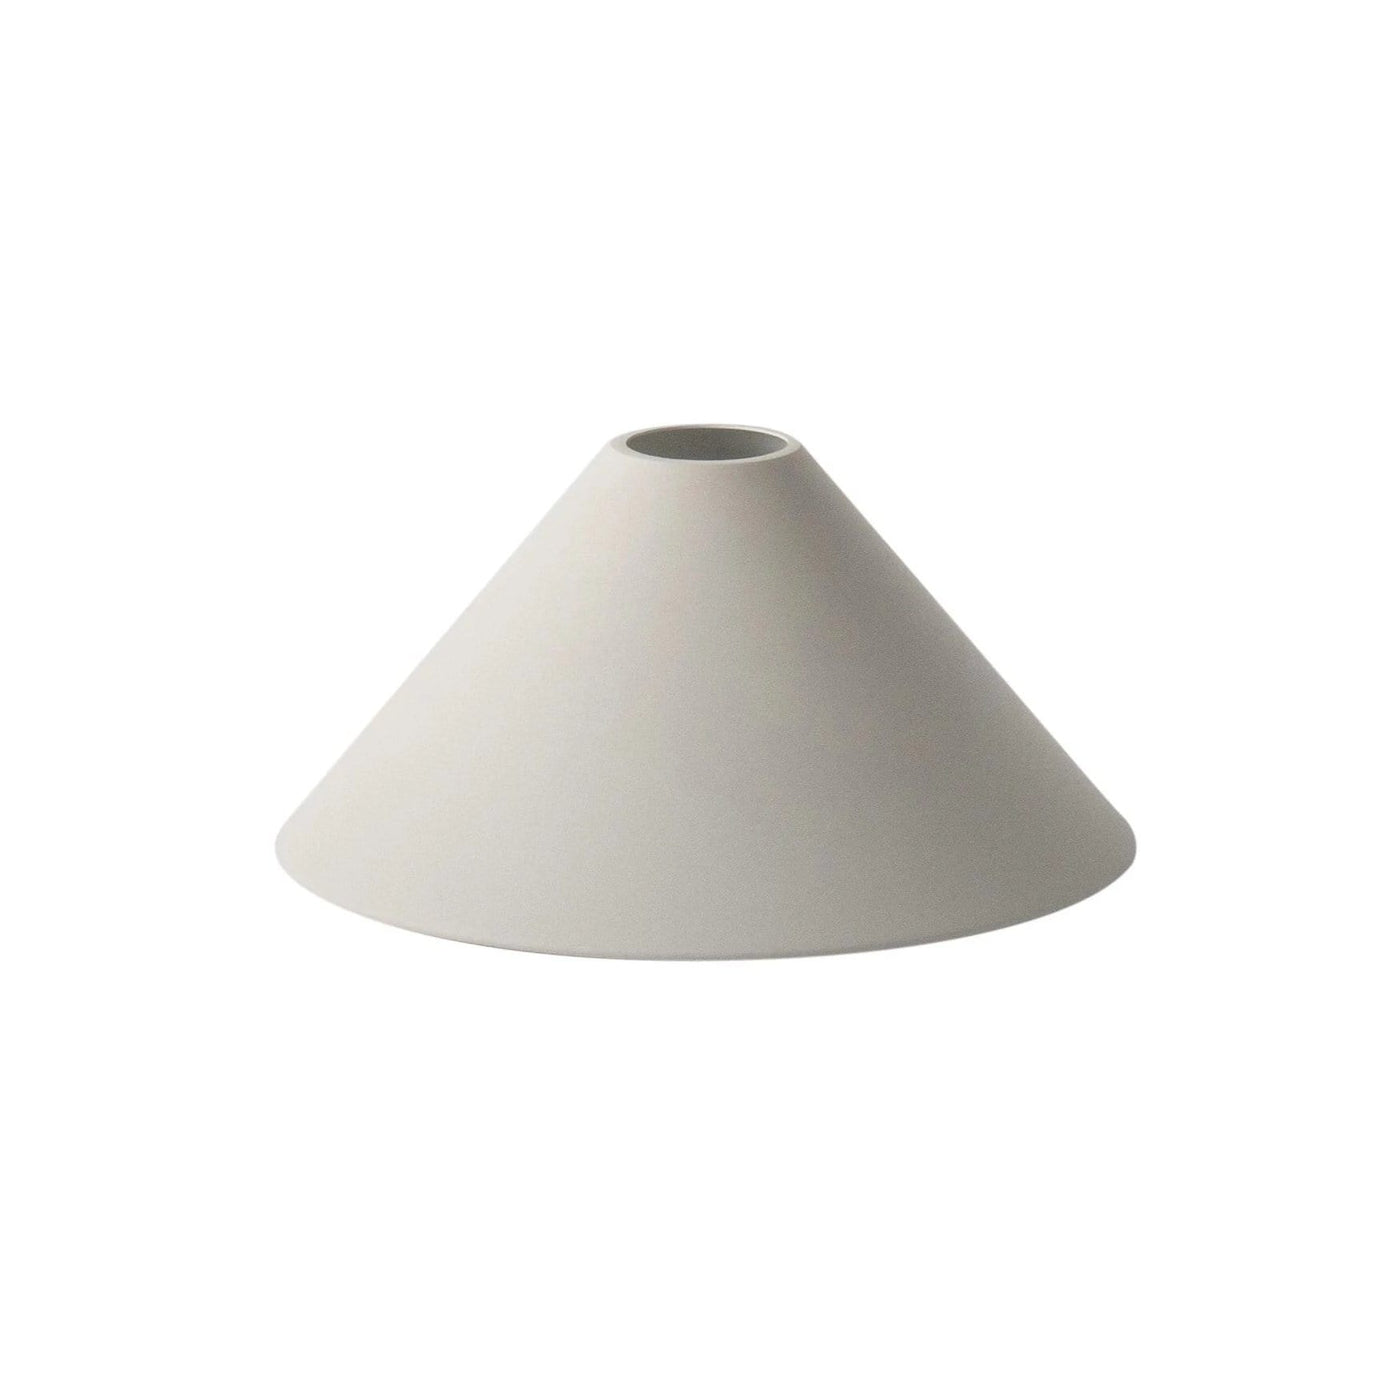 Ferm Living collect lighting series, cone shade in light grey. Available from someday designs  #colour_light-grey